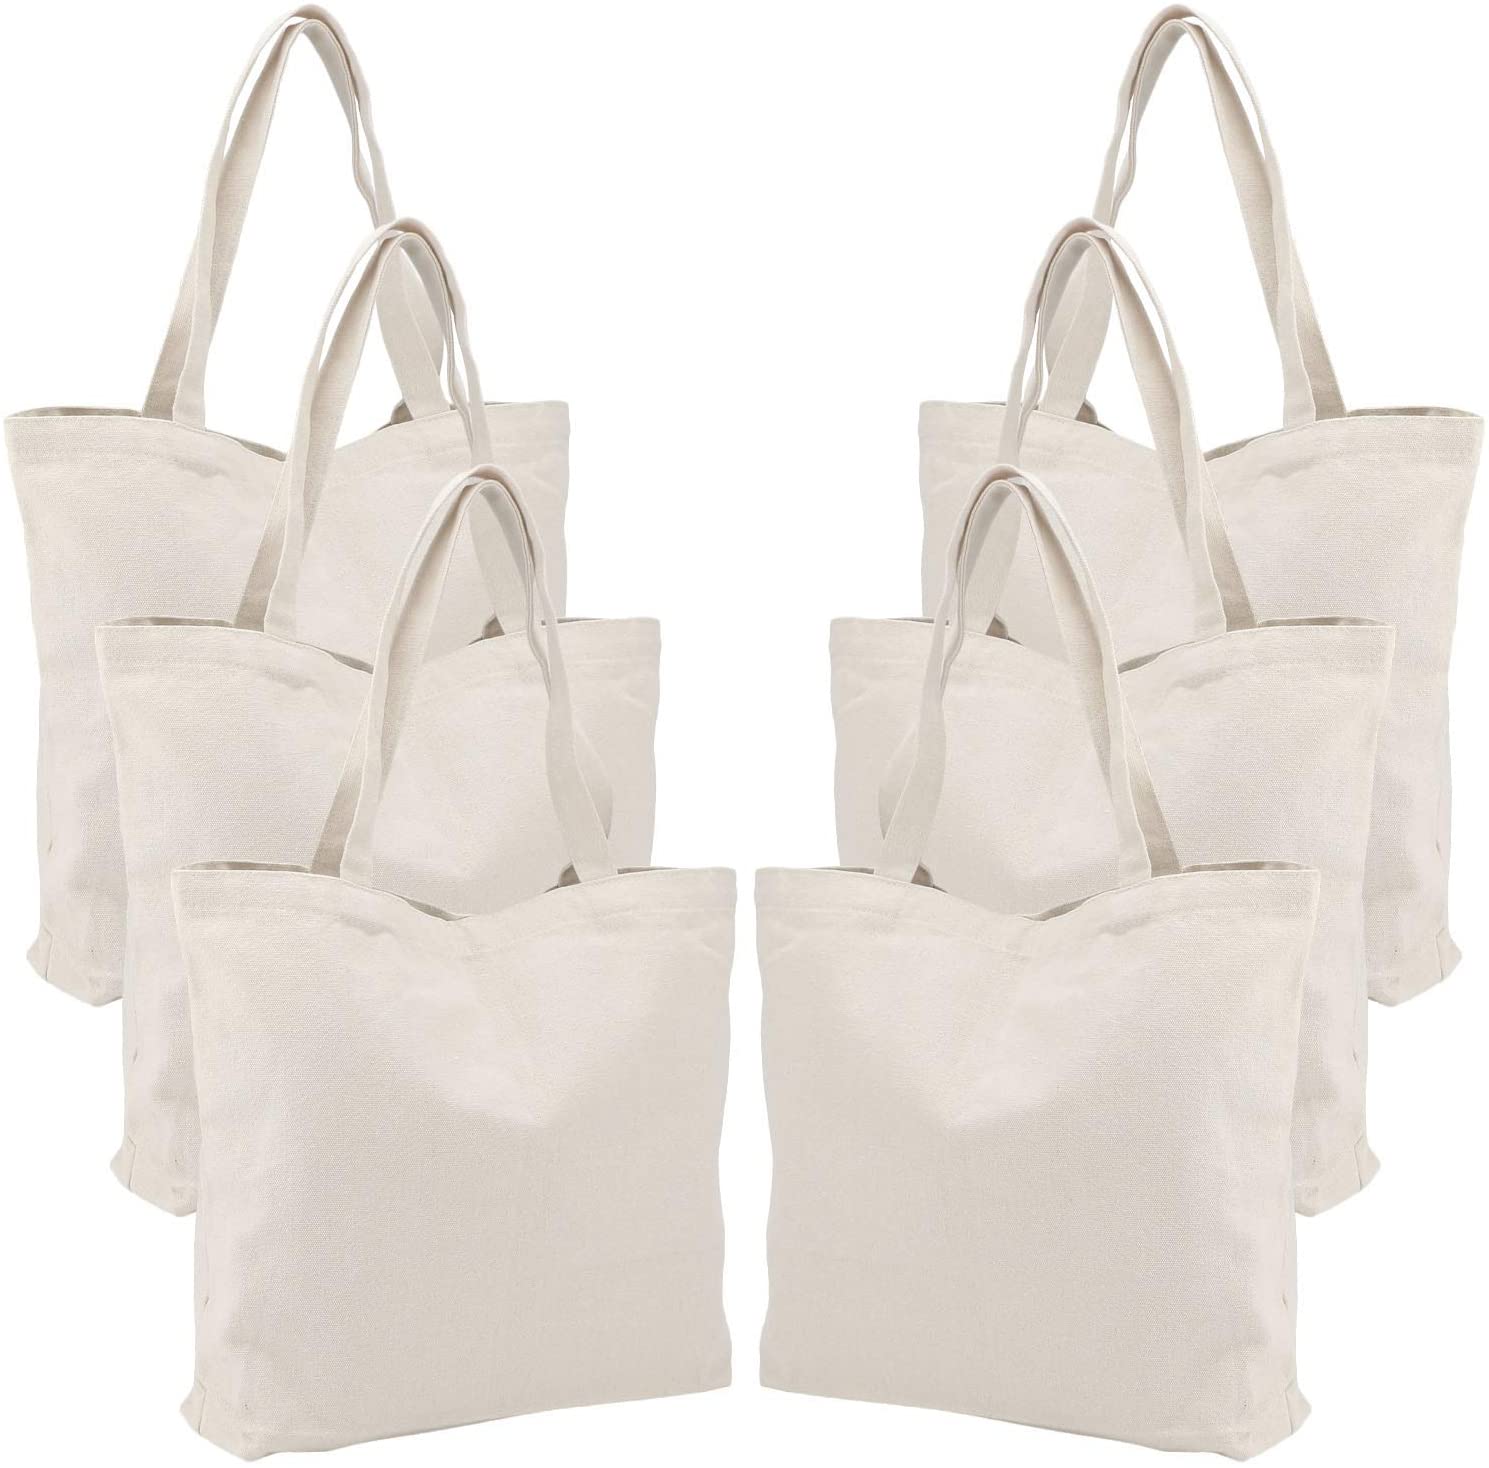 https://cdn11.bigcommerce.com/s-e0778yar7d/product_images/uploaded_images/blank-canvas-tote-bags-1.jpg